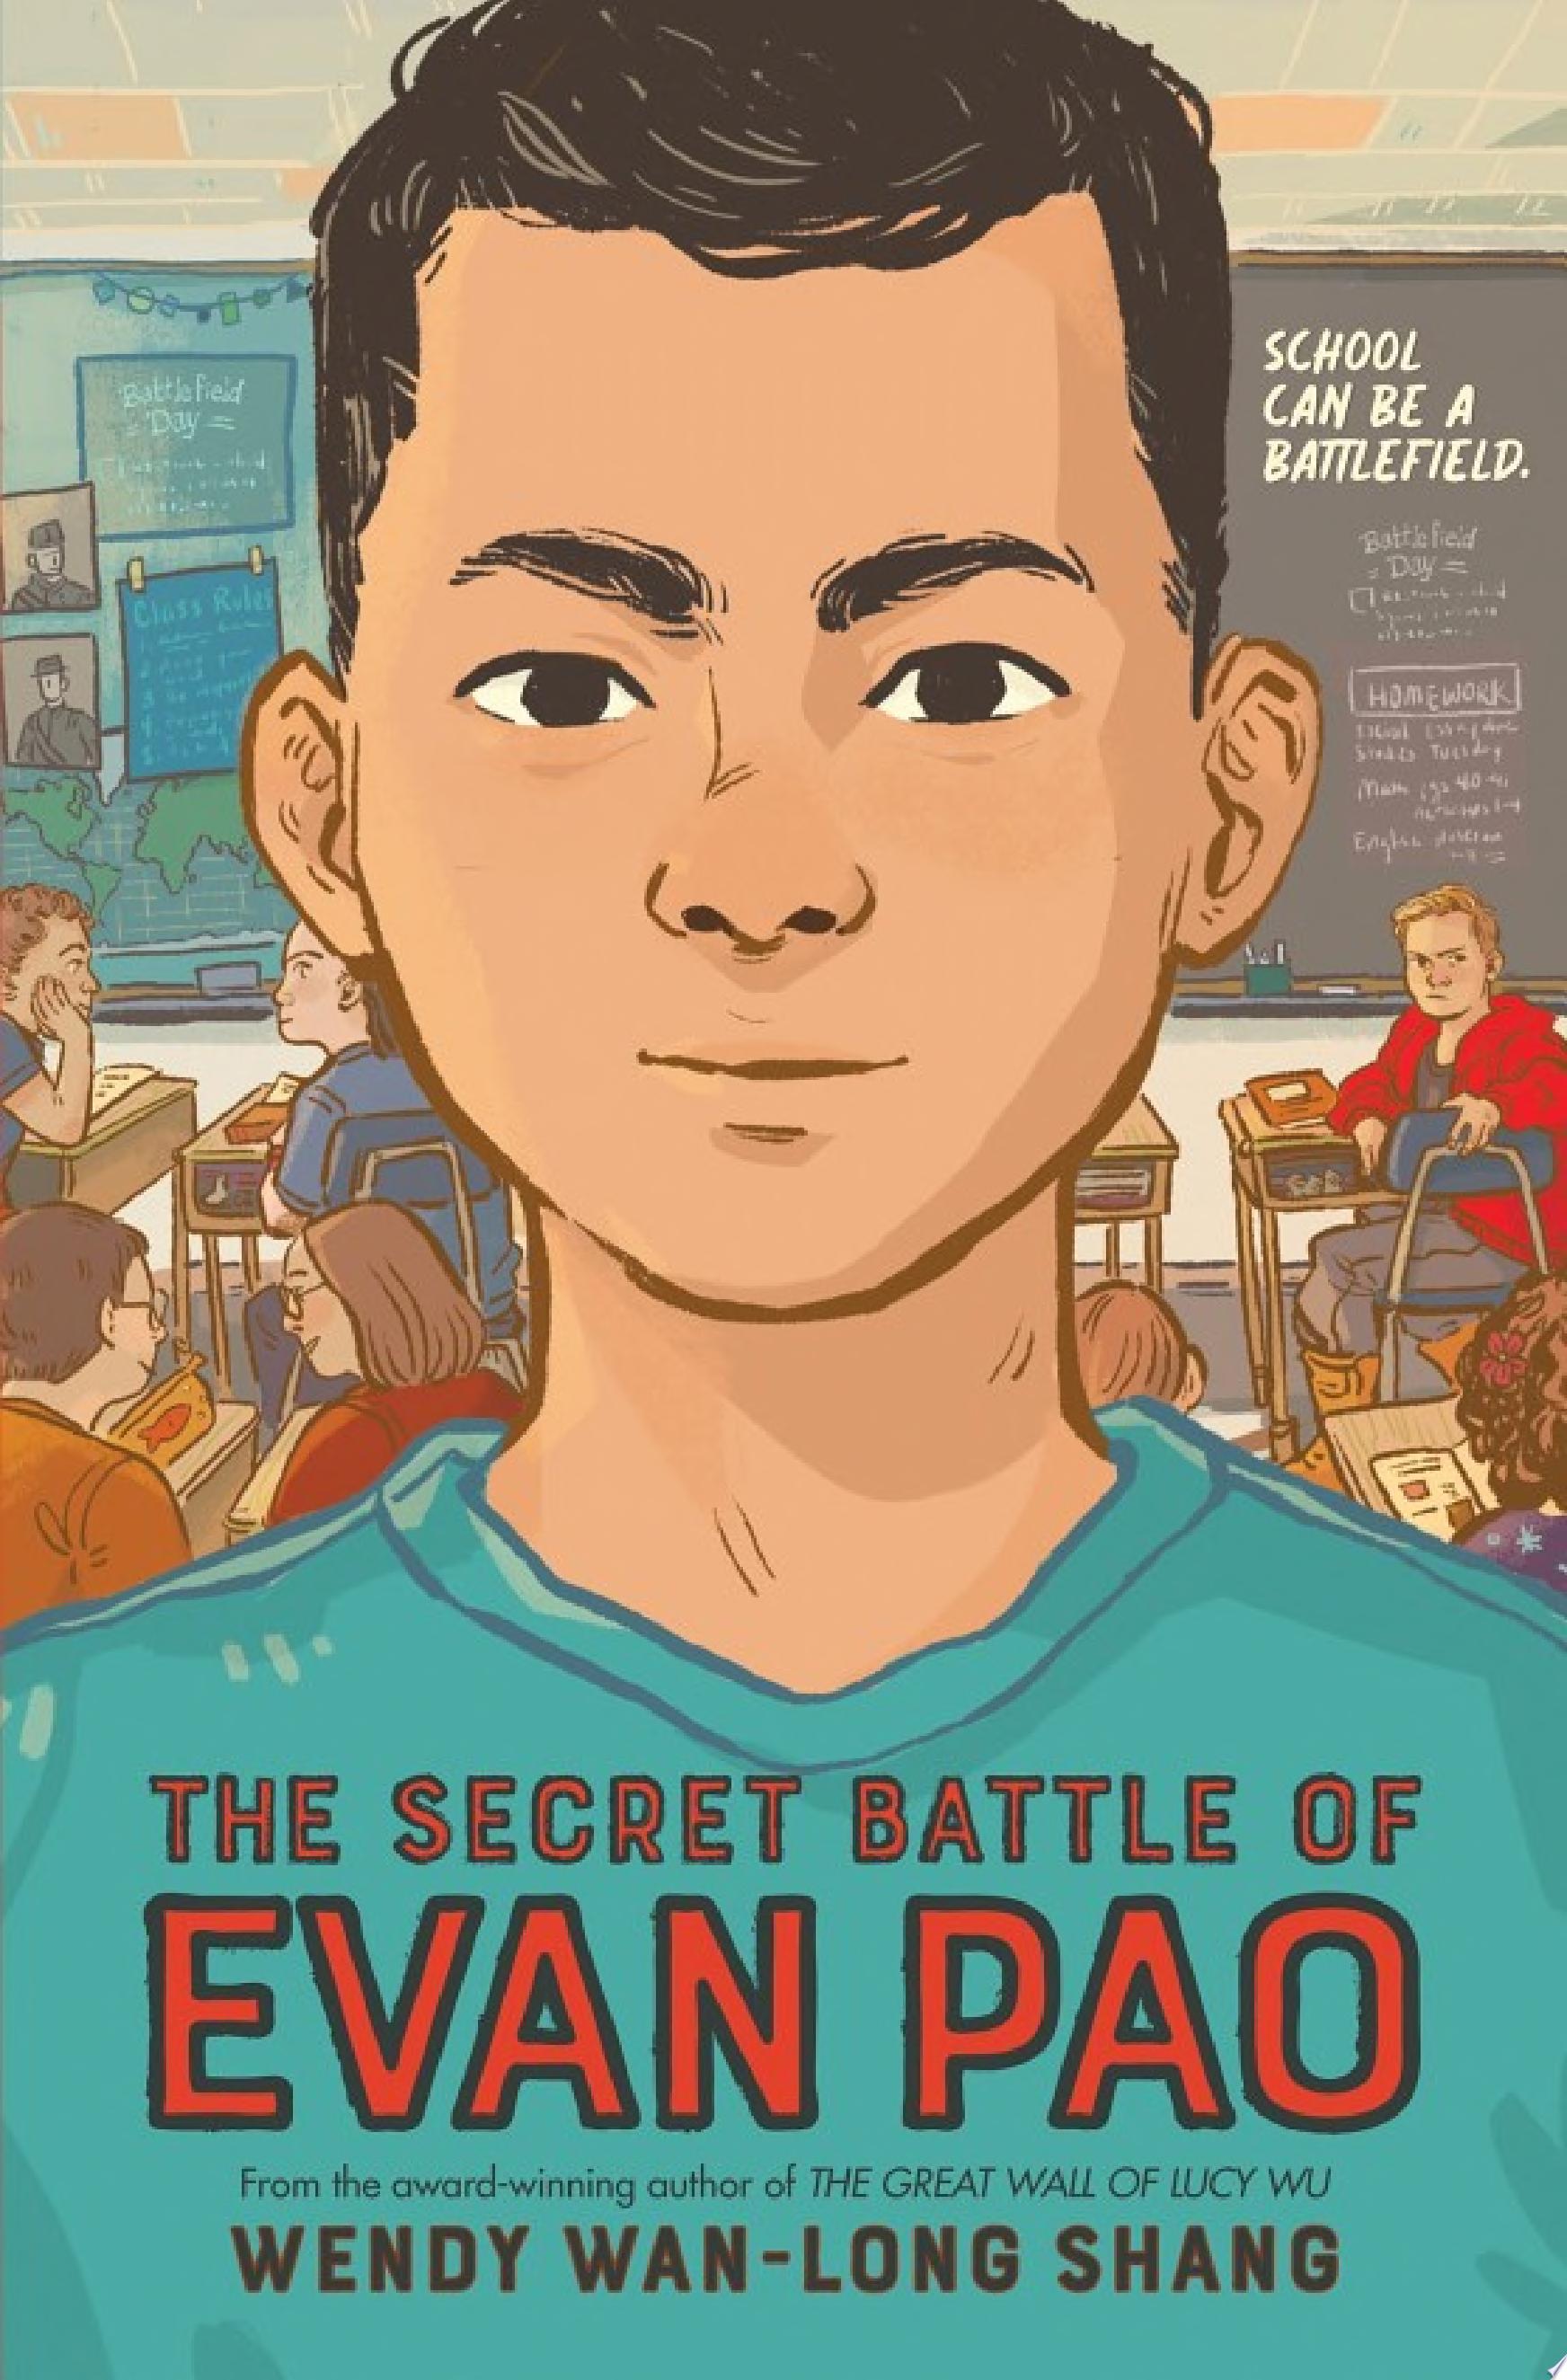 Image for "The Secret Battle of Evan Pao"